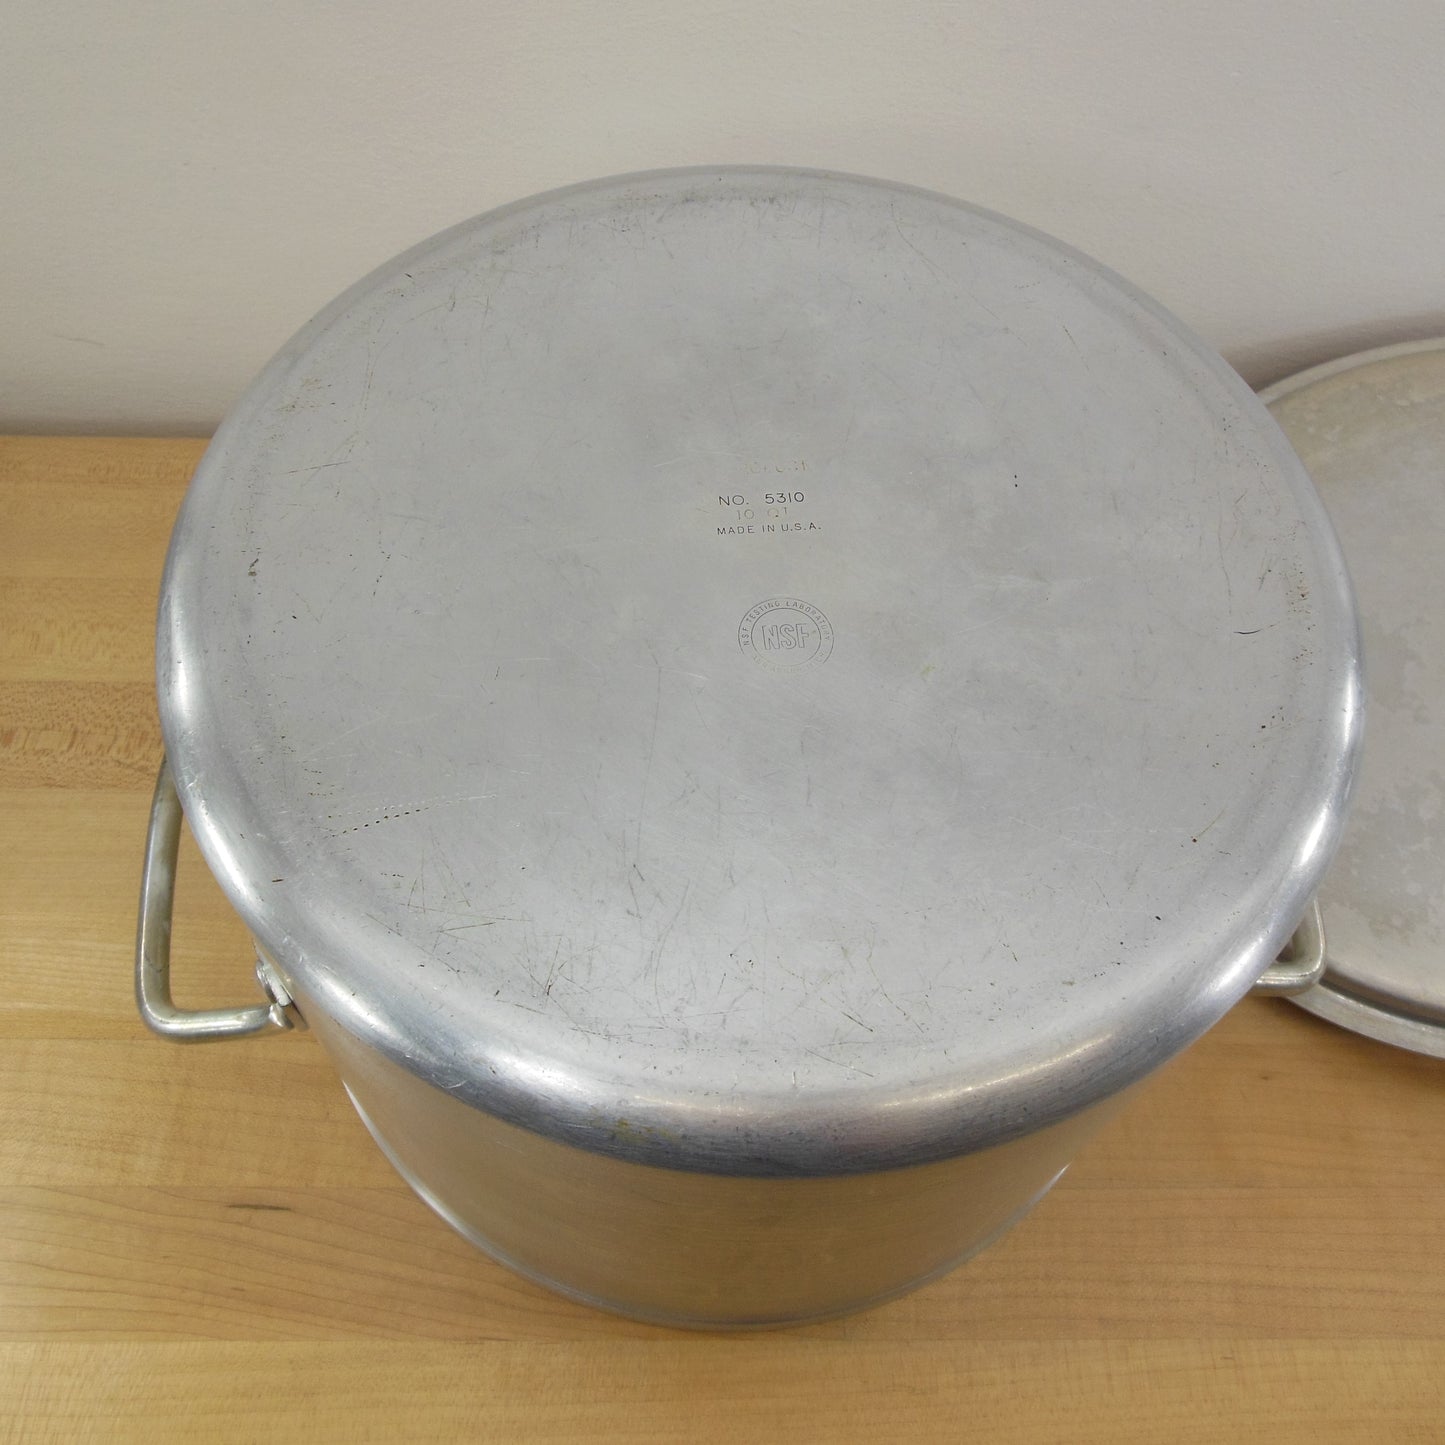 Leyse USA NSF Commercial Aluminum 10 Quart Stock Pot with Lid #5310 Cleaned